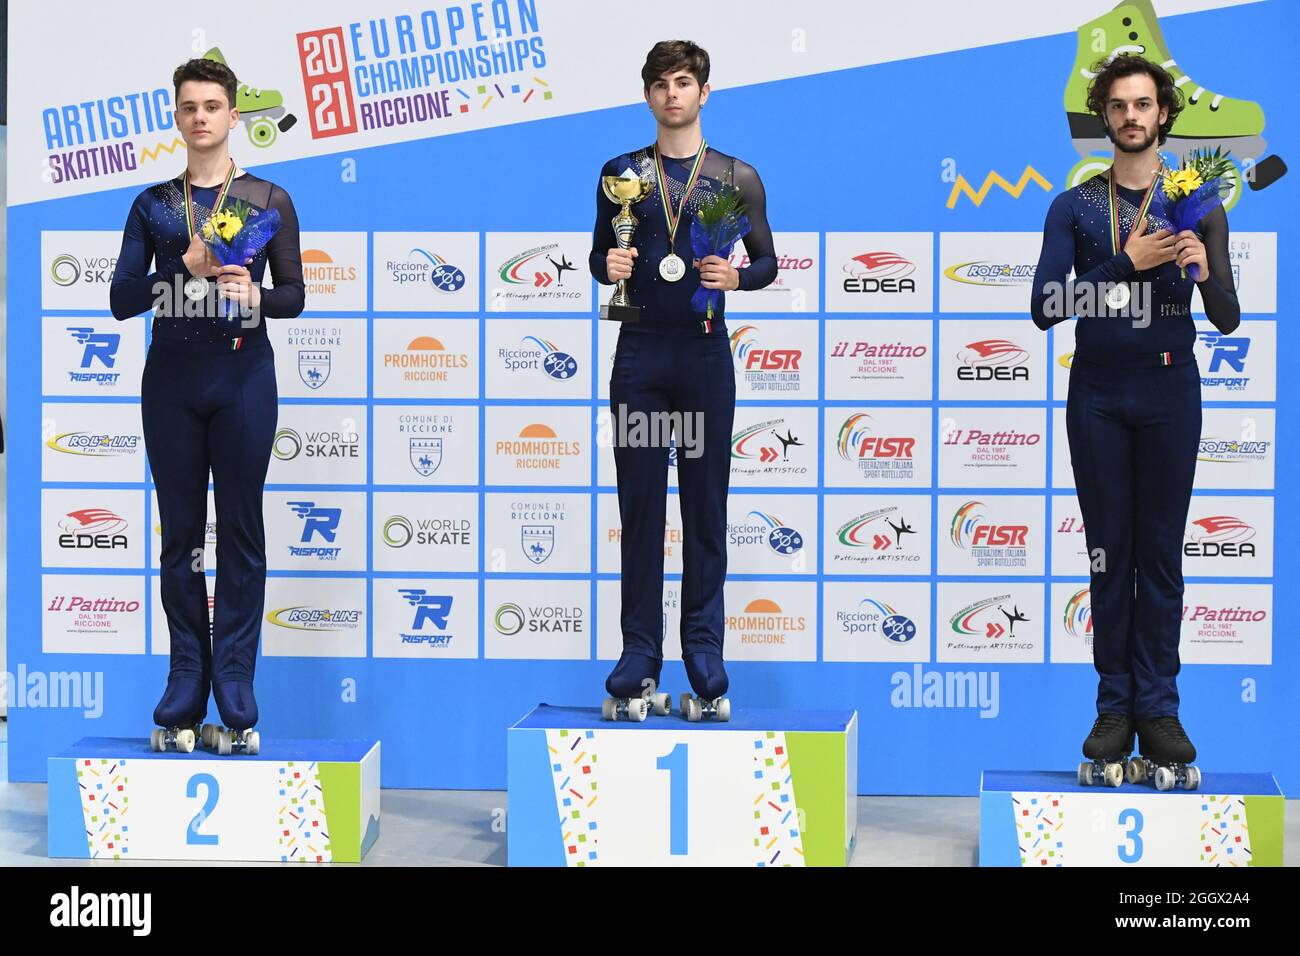 Riccione, Italy. 3rd Sep 2021. FEDERICO TRENTO, Italy, third place, MIRCO  SCHIAVONI, Italy, first place, LUCA INNOCENTI, Italy, second place, during  awards ceremony in Senior Compulsory Figures at the European Artistic Roller